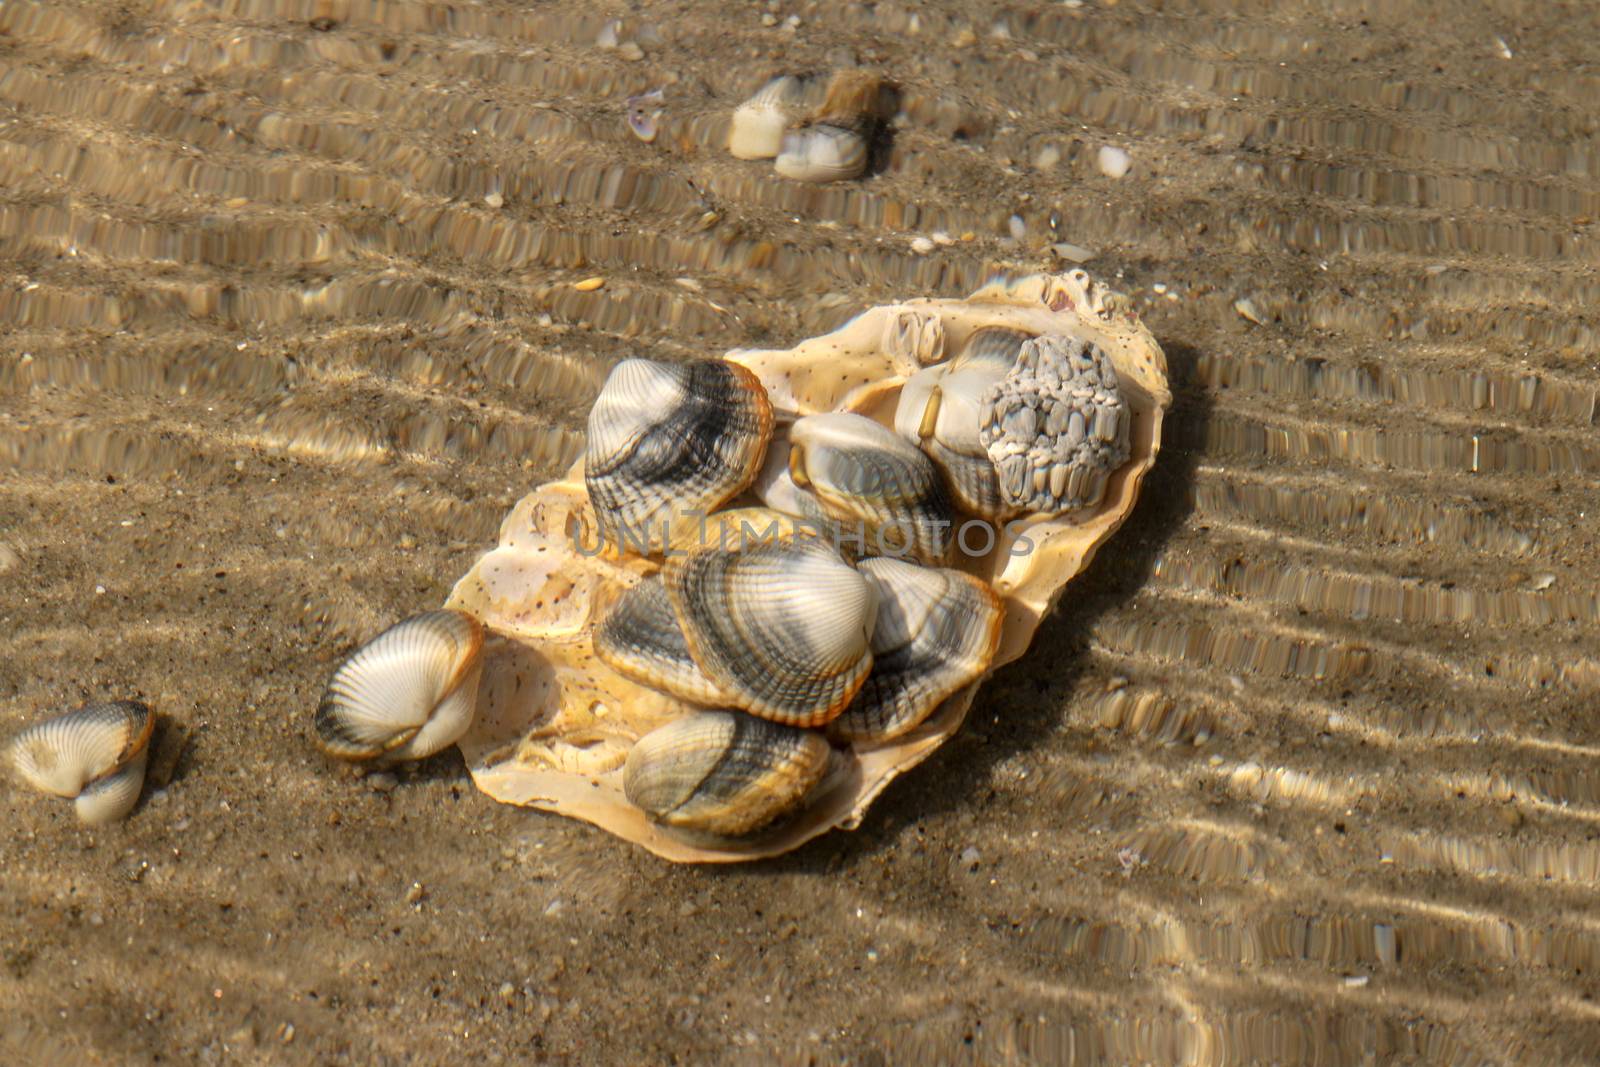 Common cockles underwater on seabed - species of edible saltwater clams